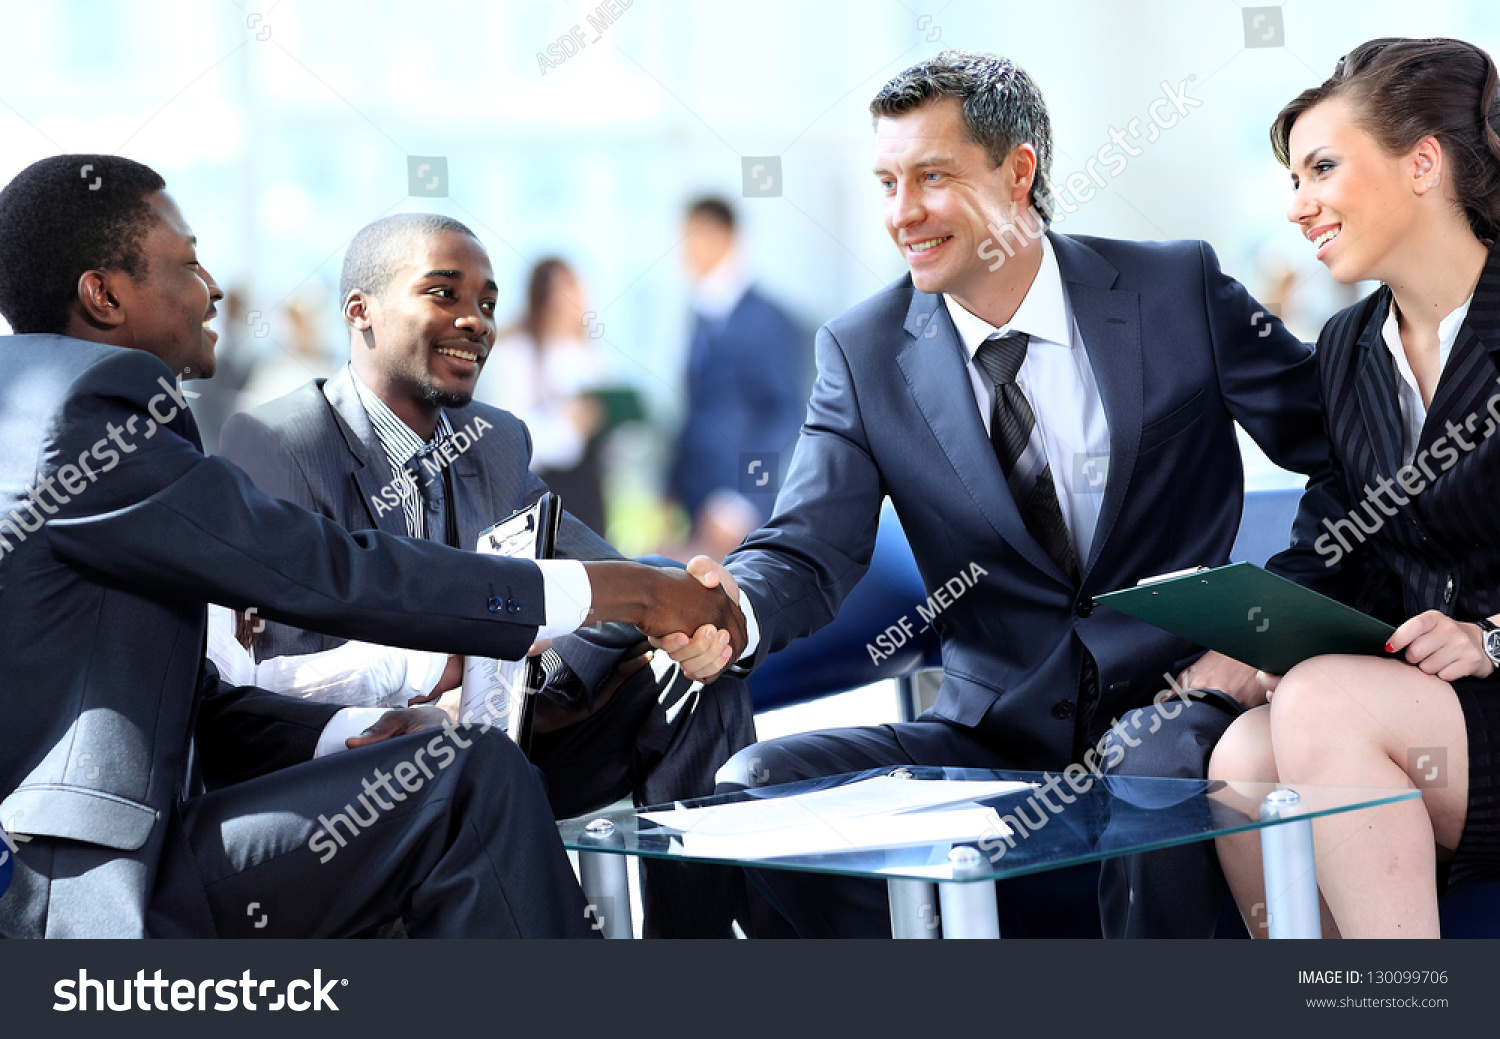 Business people shaking hands, finishing up a meeting #130099706